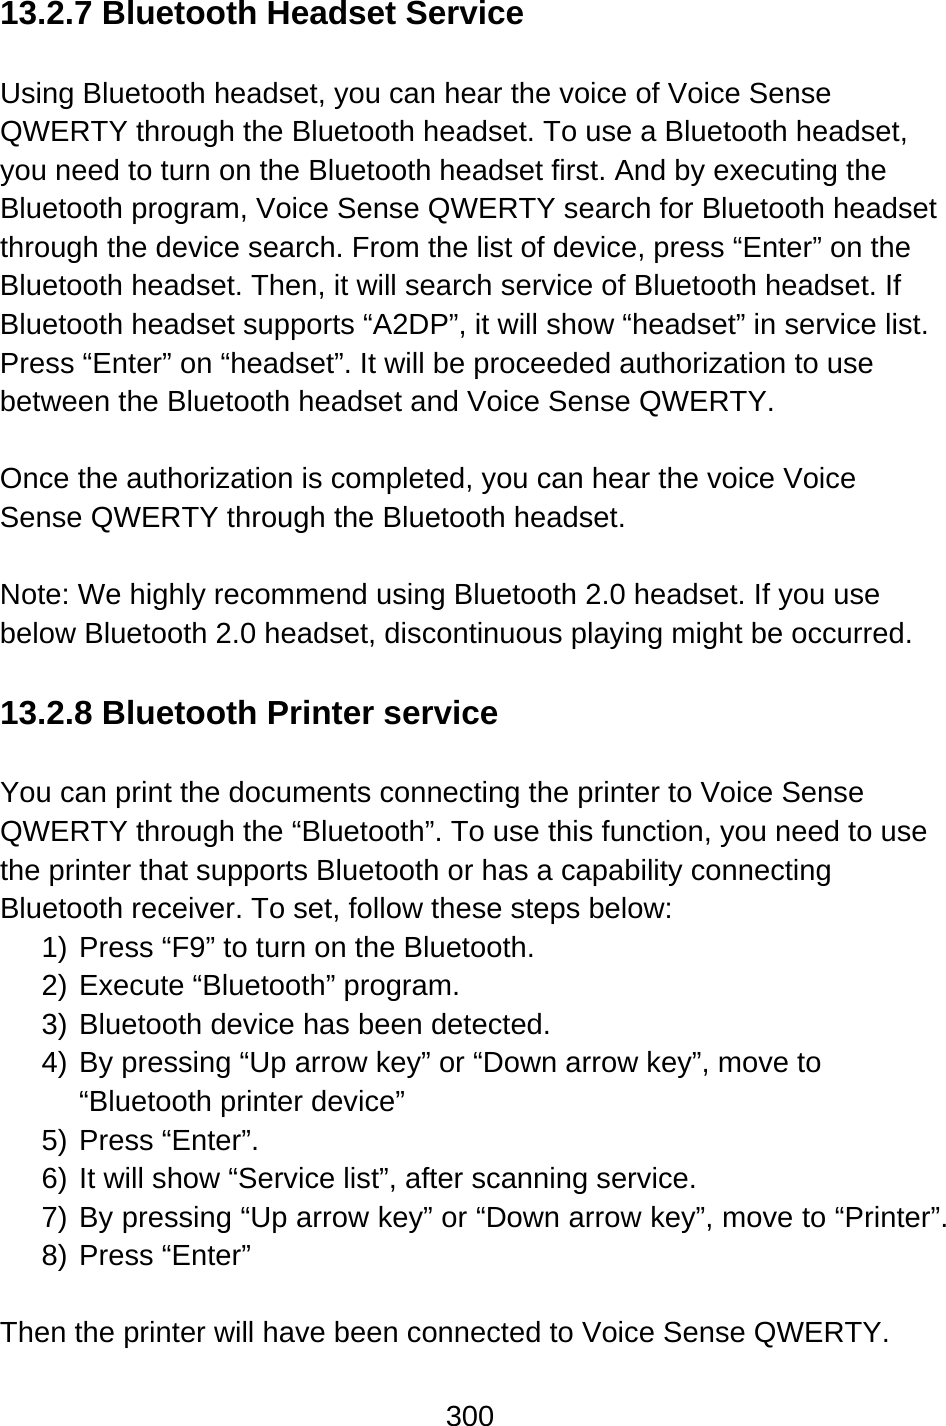 300  13.2.7 Bluetooth Headset Service  Using Bluetooth headset, you can hear the voice of Voice Sense QWERTY through the Bluetooth headset. To use a Bluetooth headset, you need to turn on the Bluetooth headset first. And by executing the Bluetooth program, Voice Sense QWERTY search for Bluetooth headset through the device search. From the list of device, press “Enter” on the Bluetooth headset. Then, it will search service of Bluetooth headset. If Bluetooth headset supports “A2DP”, it will show “headset” in service list. Press “Enter” on “headset”. It will be proceeded authorization to use between the Bluetooth headset and Voice Sense QWERTY.    Once the authorization is completed, you can hear the voice Voice Sense QWERTY through the Bluetooth headset.  Note: We highly recommend using Bluetooth 2.0 headset. If you use below Bluetooth 2.0 headset, discontinuous playing might be occurred.  13.2.8 Bluetooth Printer service  You can print the documents connecting the printer to Voice Sense QWERTY through the “Bluetooth”. To use this function, you need to use the printer that supports Bluetooth or has a capability connecting Bluetooth receiver. To set, follow these steps below: 1) Press “F9” to turn on the Bluetooth. 2) Execute “Bluetooth” program. 3) Bluetooth device has been detected. 4) By pressing “Up arrow key” or “Down arrow key”, move to “Bluetooth printer device”   5) Press “Enter”. 6) It will show “Service list”, after scanning service. 7) By pressing “Up arrow key” or “Down arrow key”, move to “Printer”. 8) Press “Enter”   Then the printer will have been connected to Voice Sense QWERTY.  